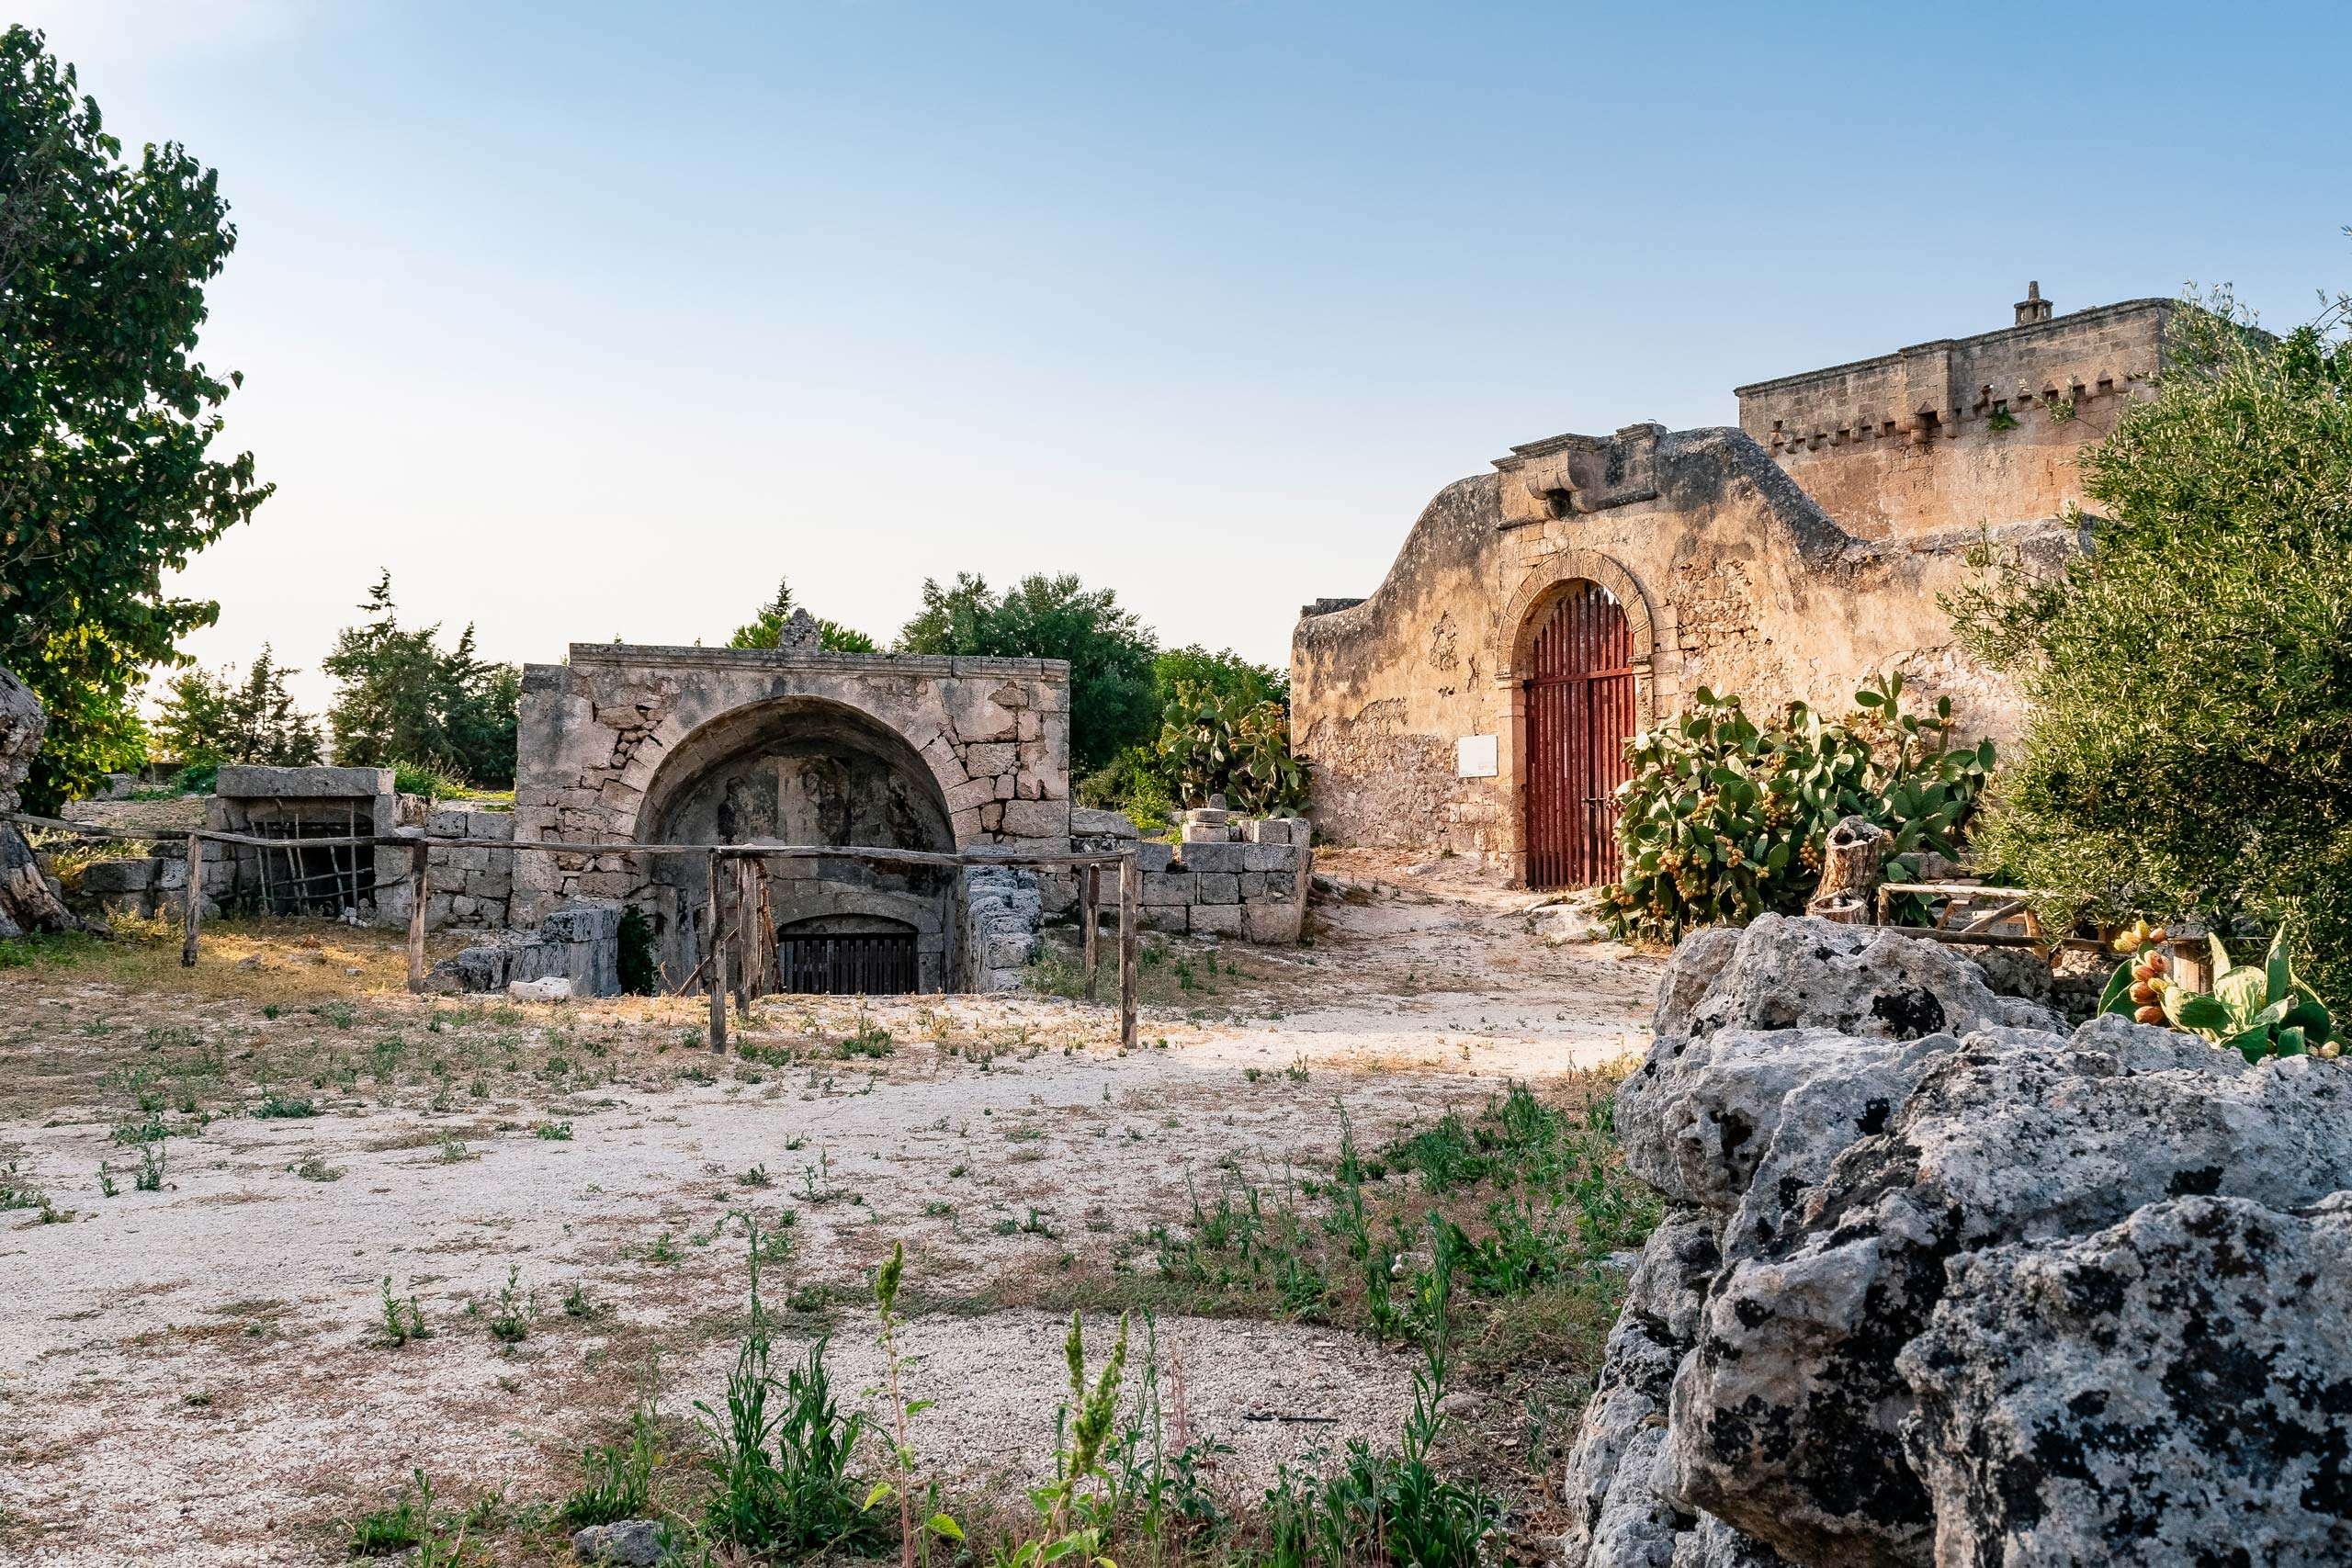 A panoramic view of the Rural Park of Masseria Spina Resort in Puglia